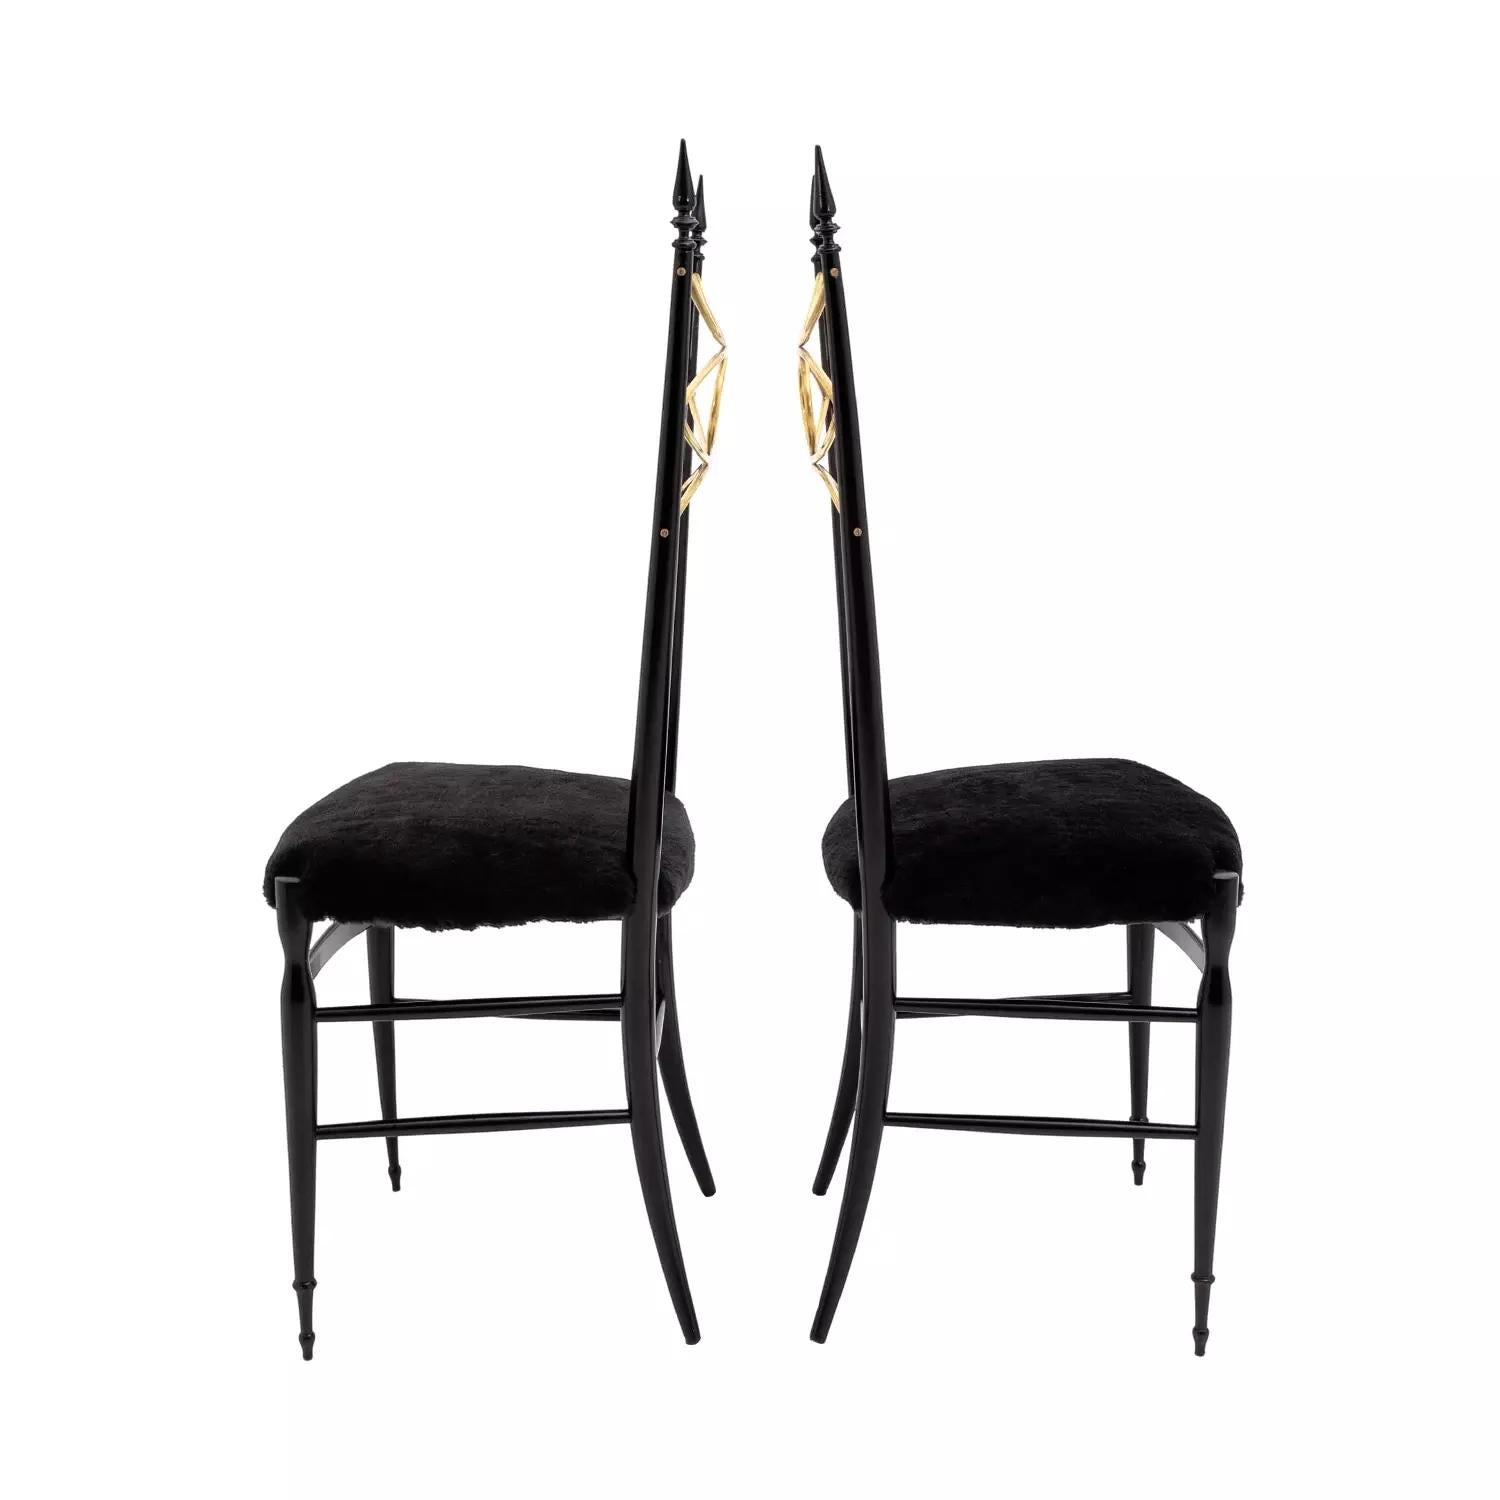 Mid-Century Modern 20th Century Italian Pair Brass Eye-Shaped Dining Room Chairs by Paolo Buffa For Sale